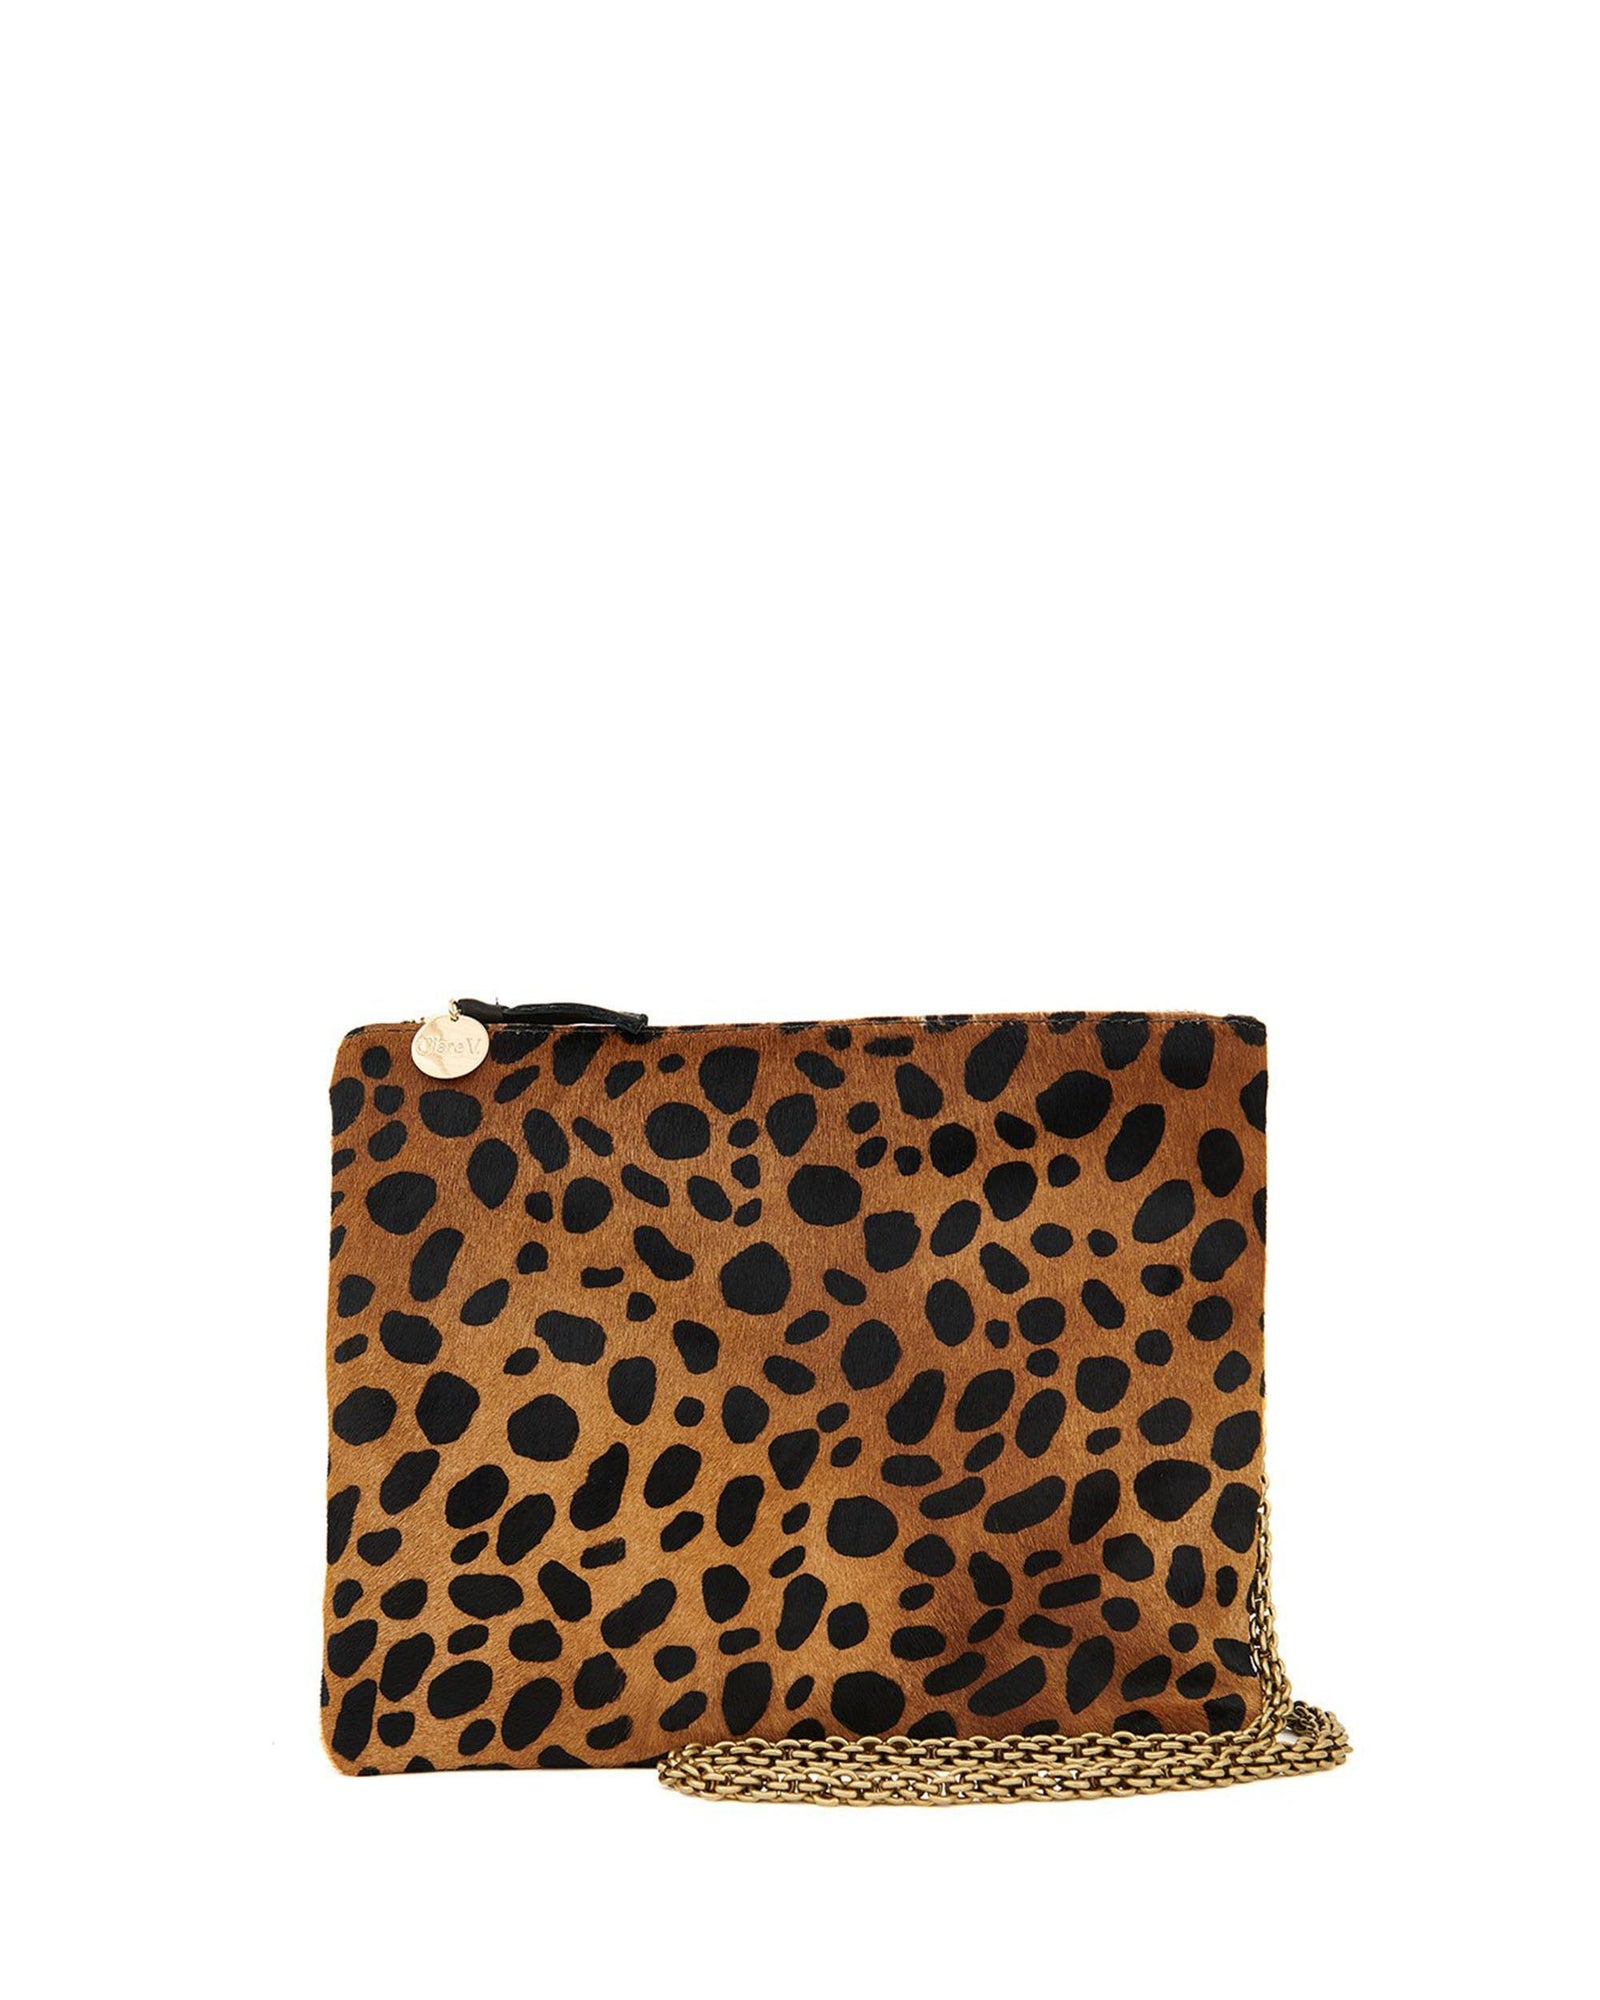 Leopard Hair-On Double Sac Bretelle with Thick Chain Crossbody Strap